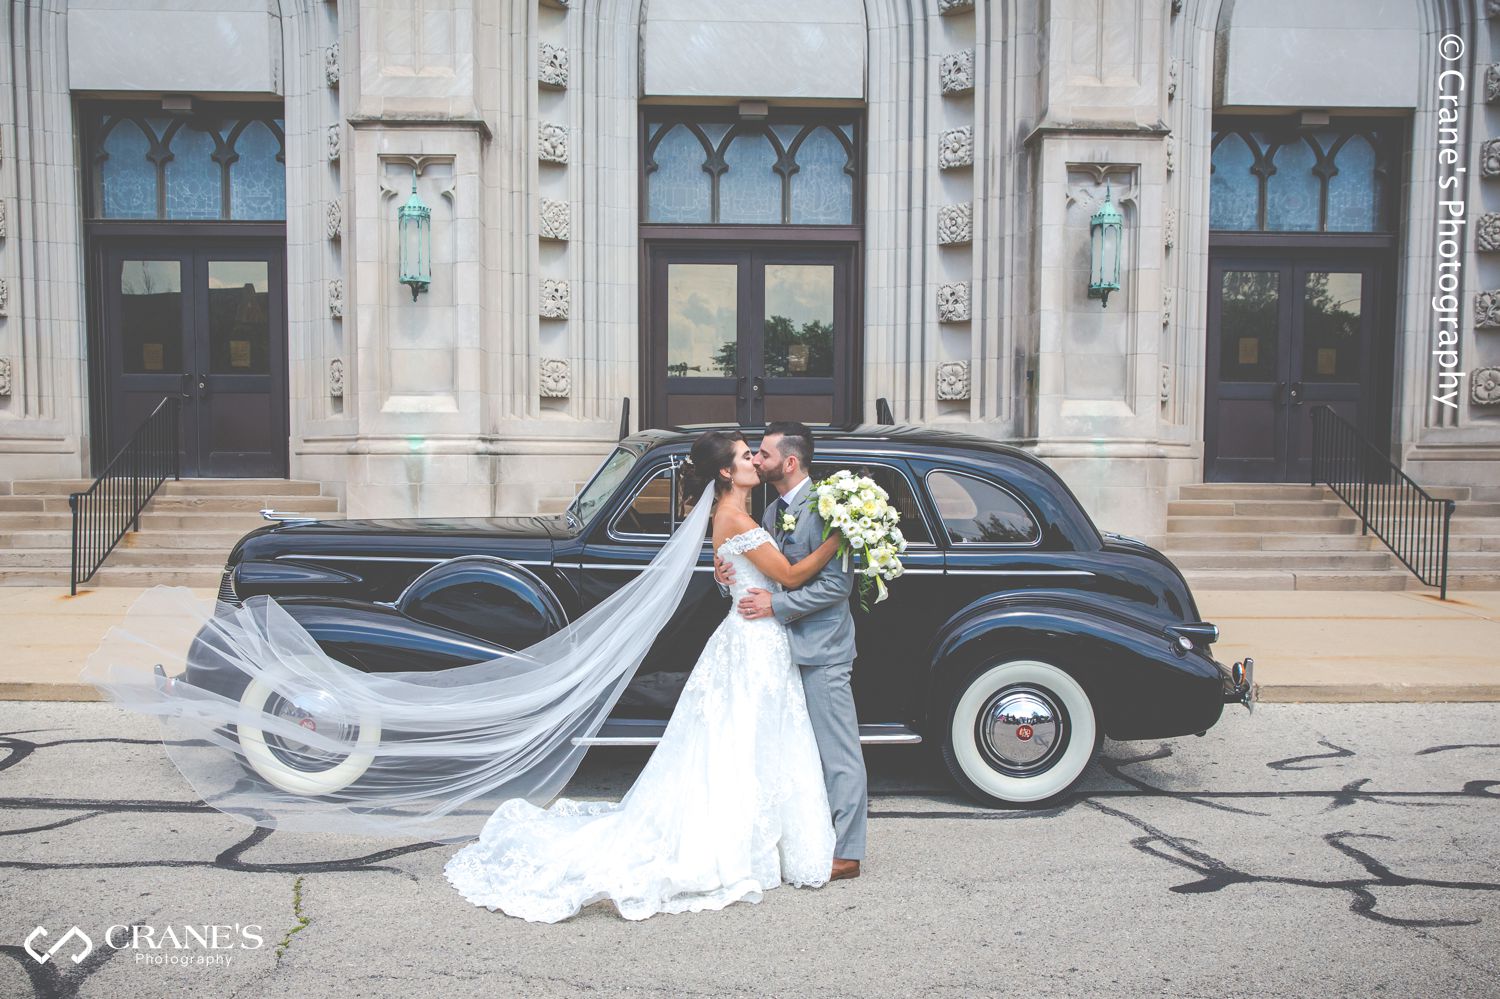 Bride and groom kiss in front of their vintage car in front of St. Peter and Paul Church in Naperville.